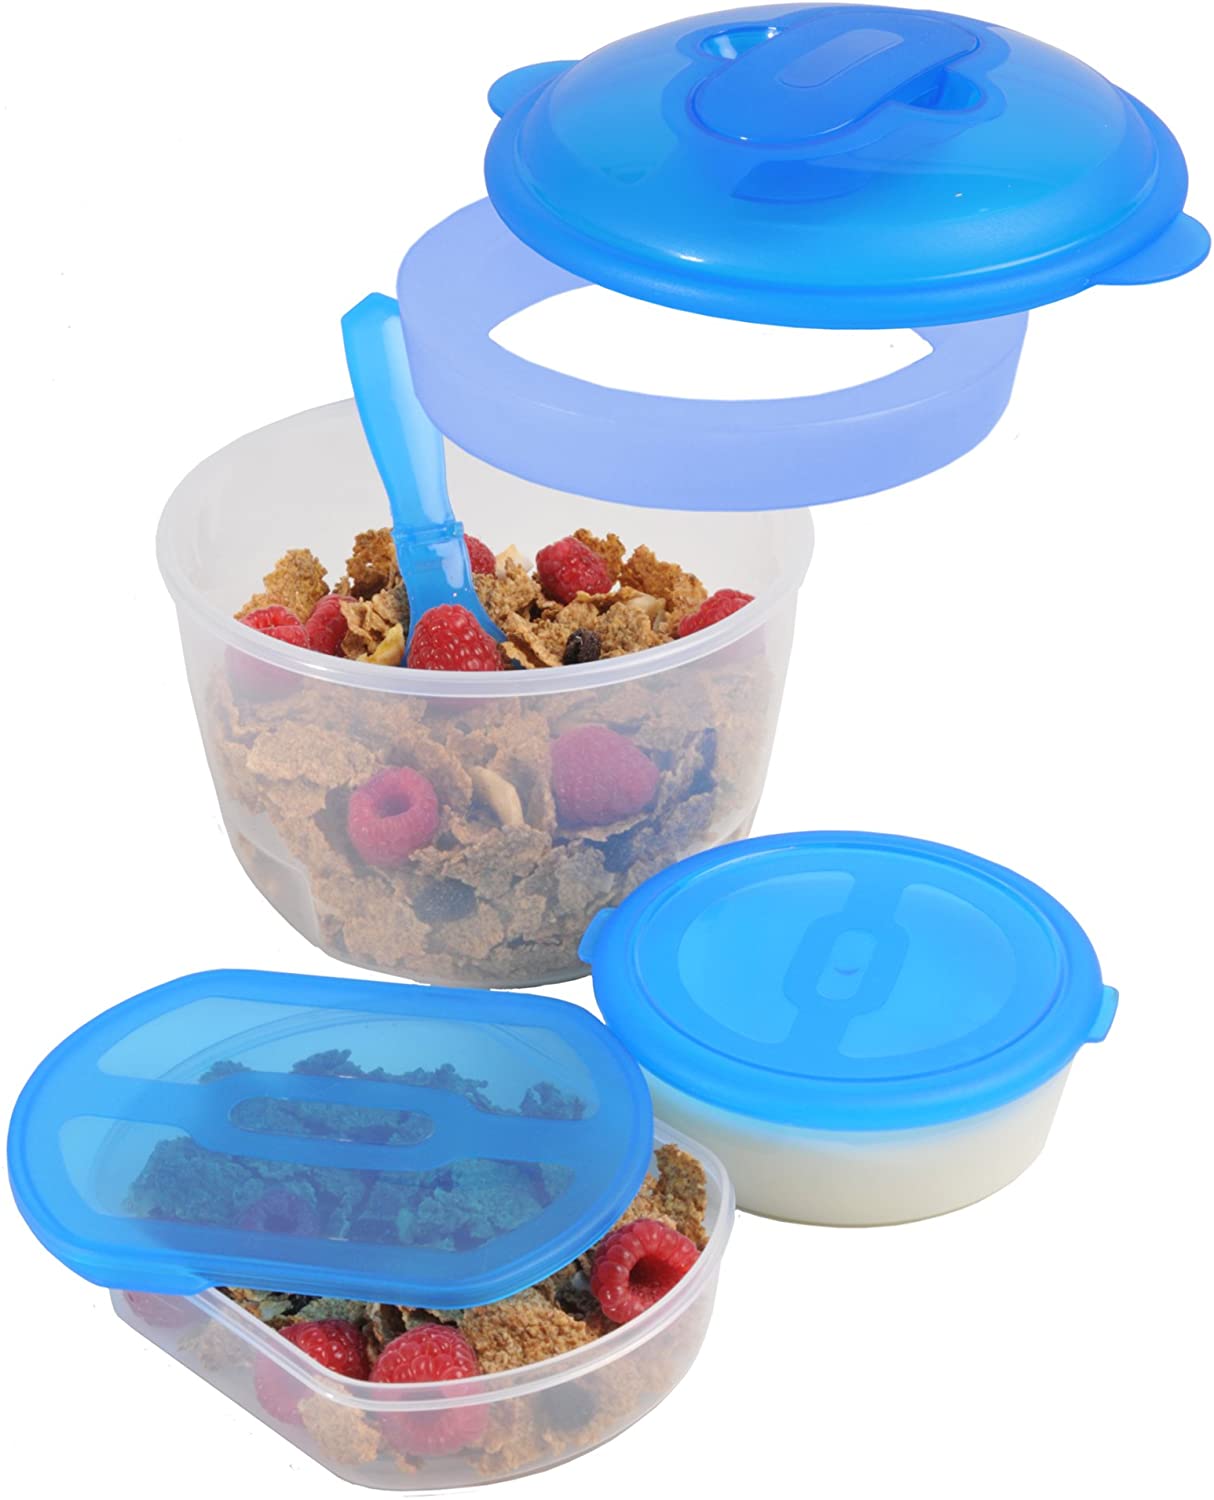 Polar Gear Lunch Boxes Breakfast Chiller Food Separate